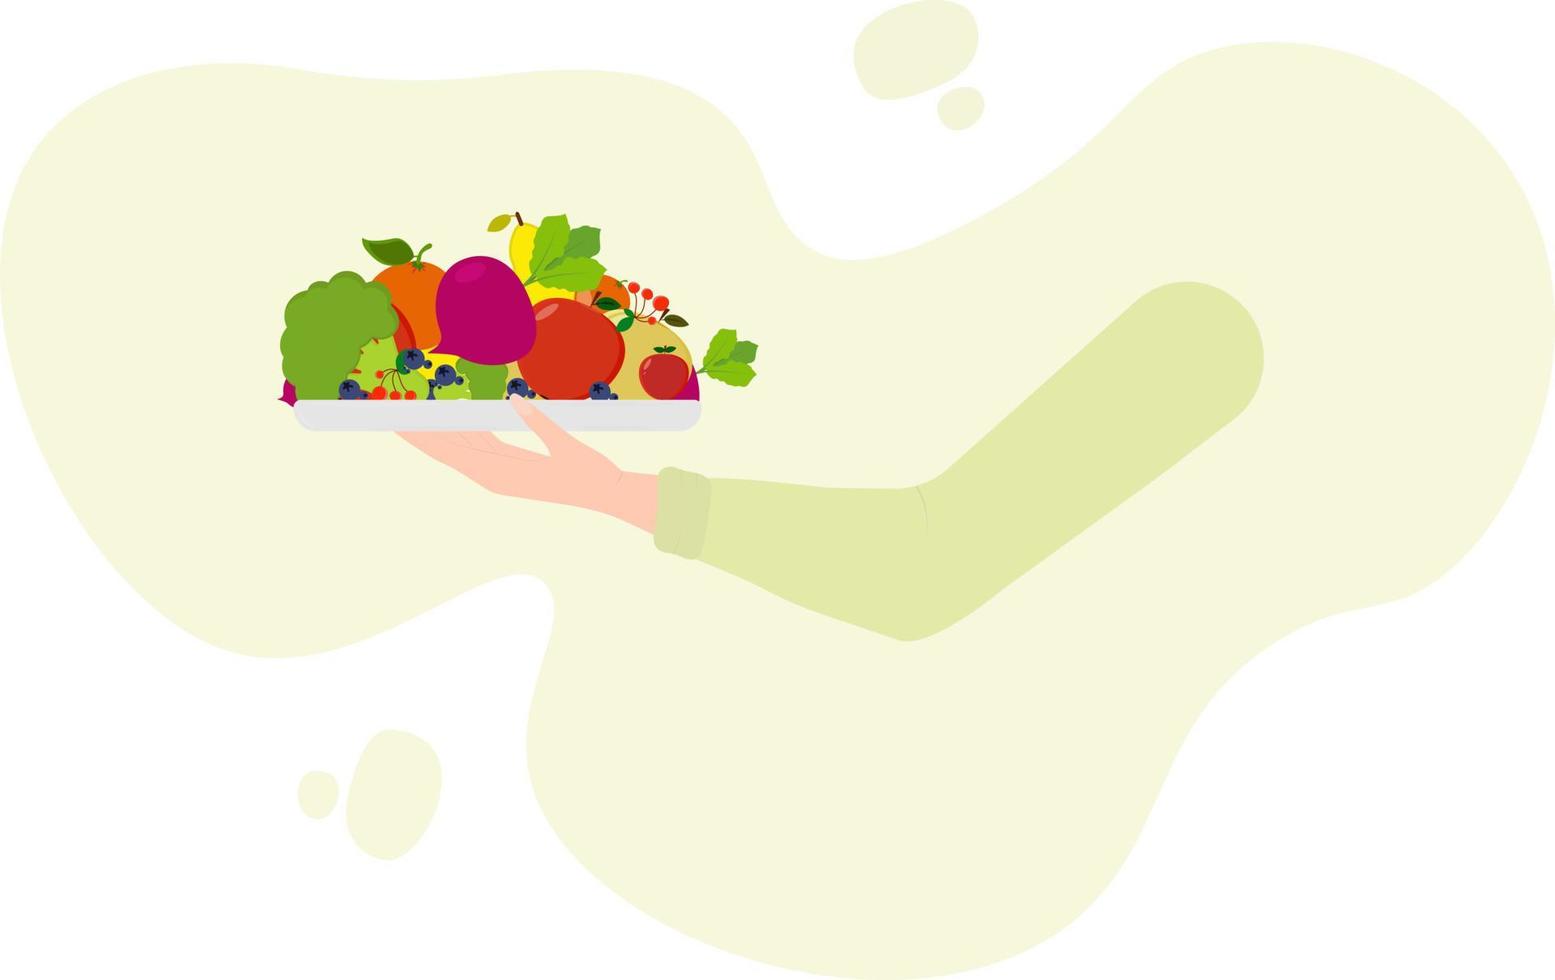 Vegetarian diet concept - hand holding a plate with vegetables and fruits.Veganuary is an annual challenge that encourages people to follow a vegan lifestyle vector